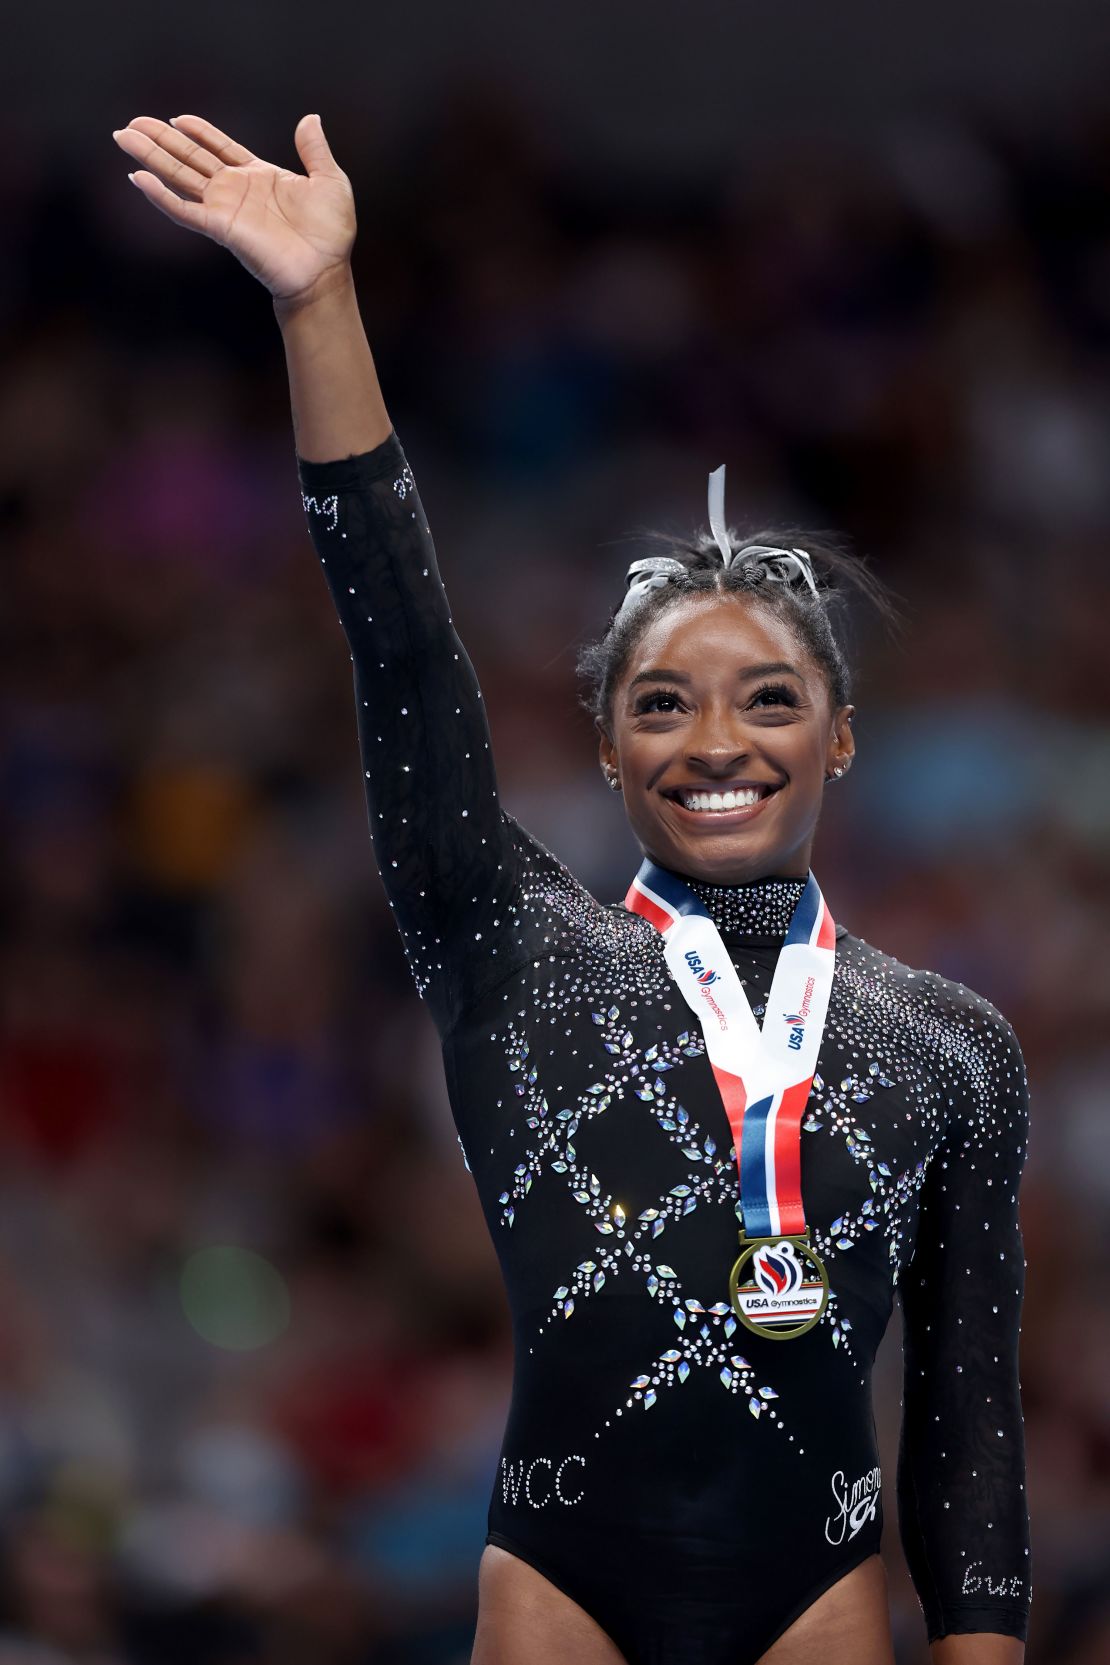 SAN JOSE, CALIFORNIA - AUGUST 27: Simone Biles celebrates after placing first in the balance beam competition on day four of the 2023 U.S. Gymnastics Championships at SAP Center on August 27, 2023 in San Jose, California. (Photo by Ezra Shaw/Getty Images)